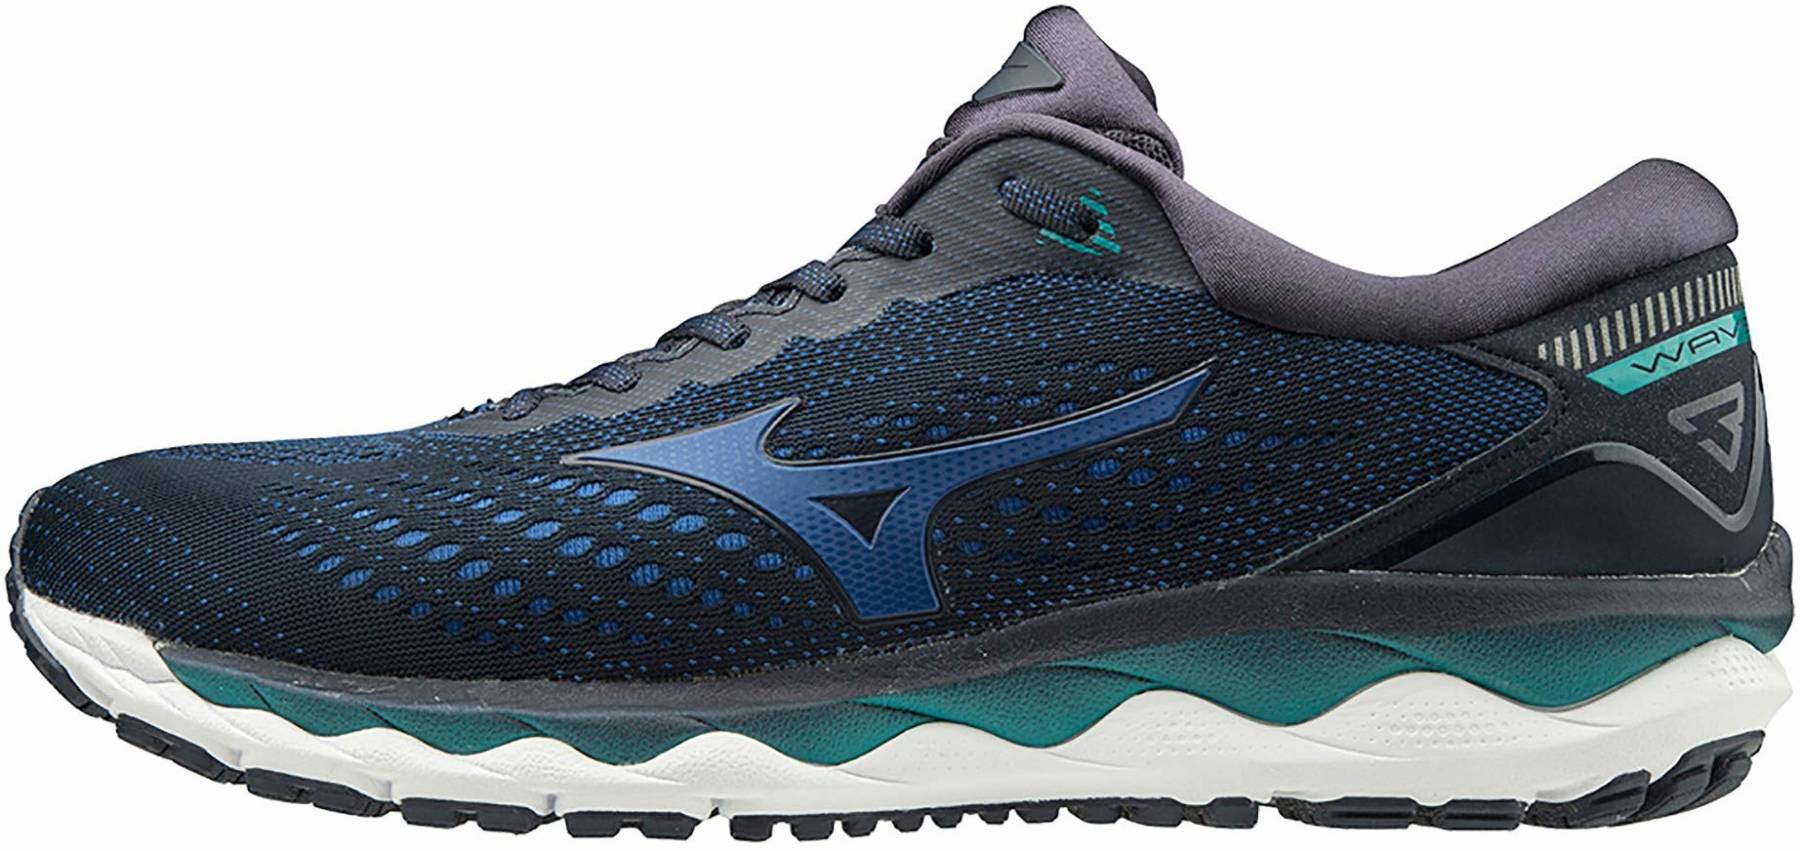 Sobriquette official Objector 7 Reasons to/NOT to Buy Mizuno Wave Sky 3 (Sep 2022) | RunRepeat